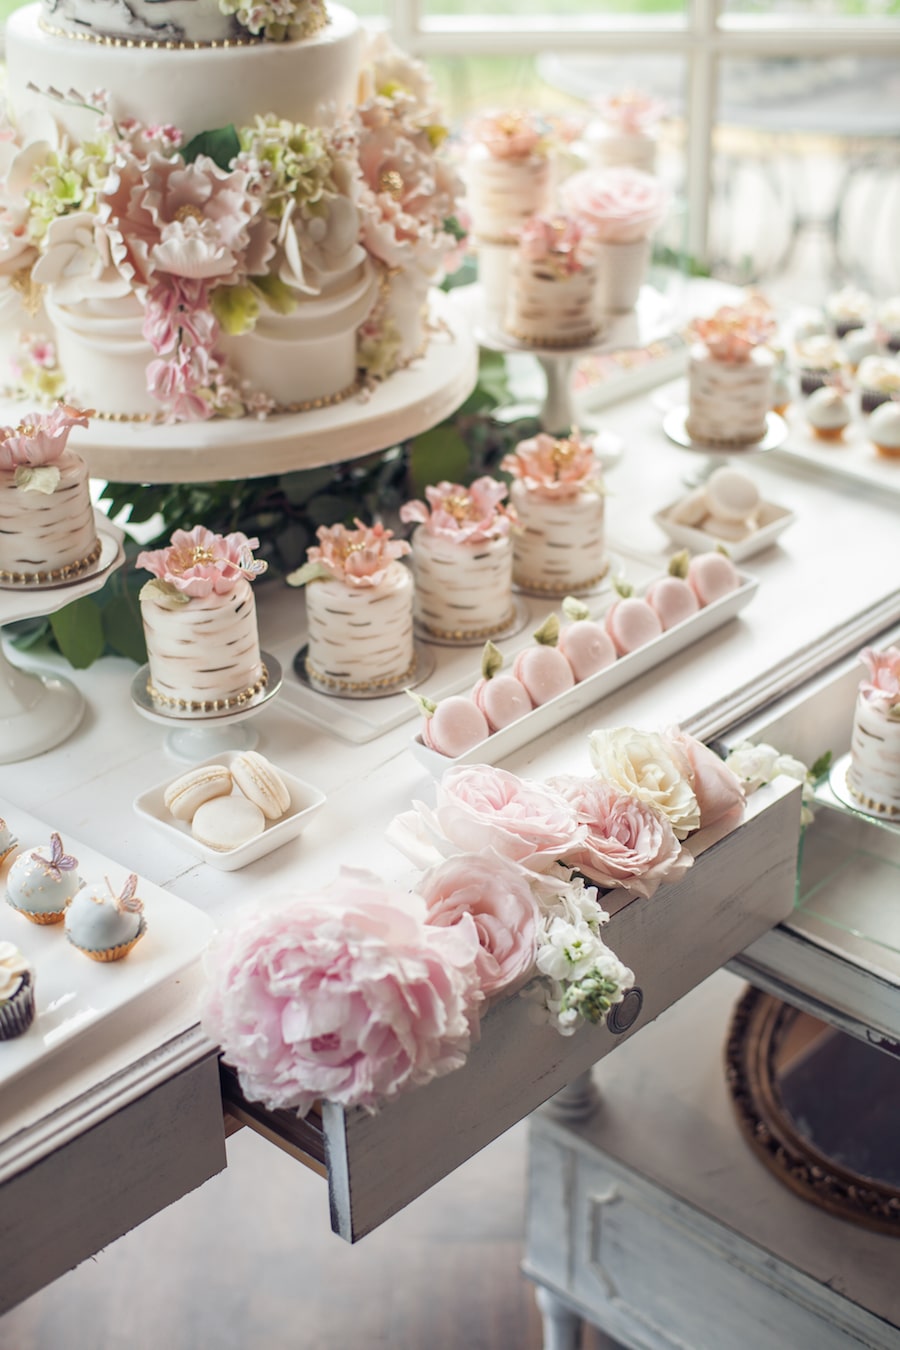 Cake and sweets table